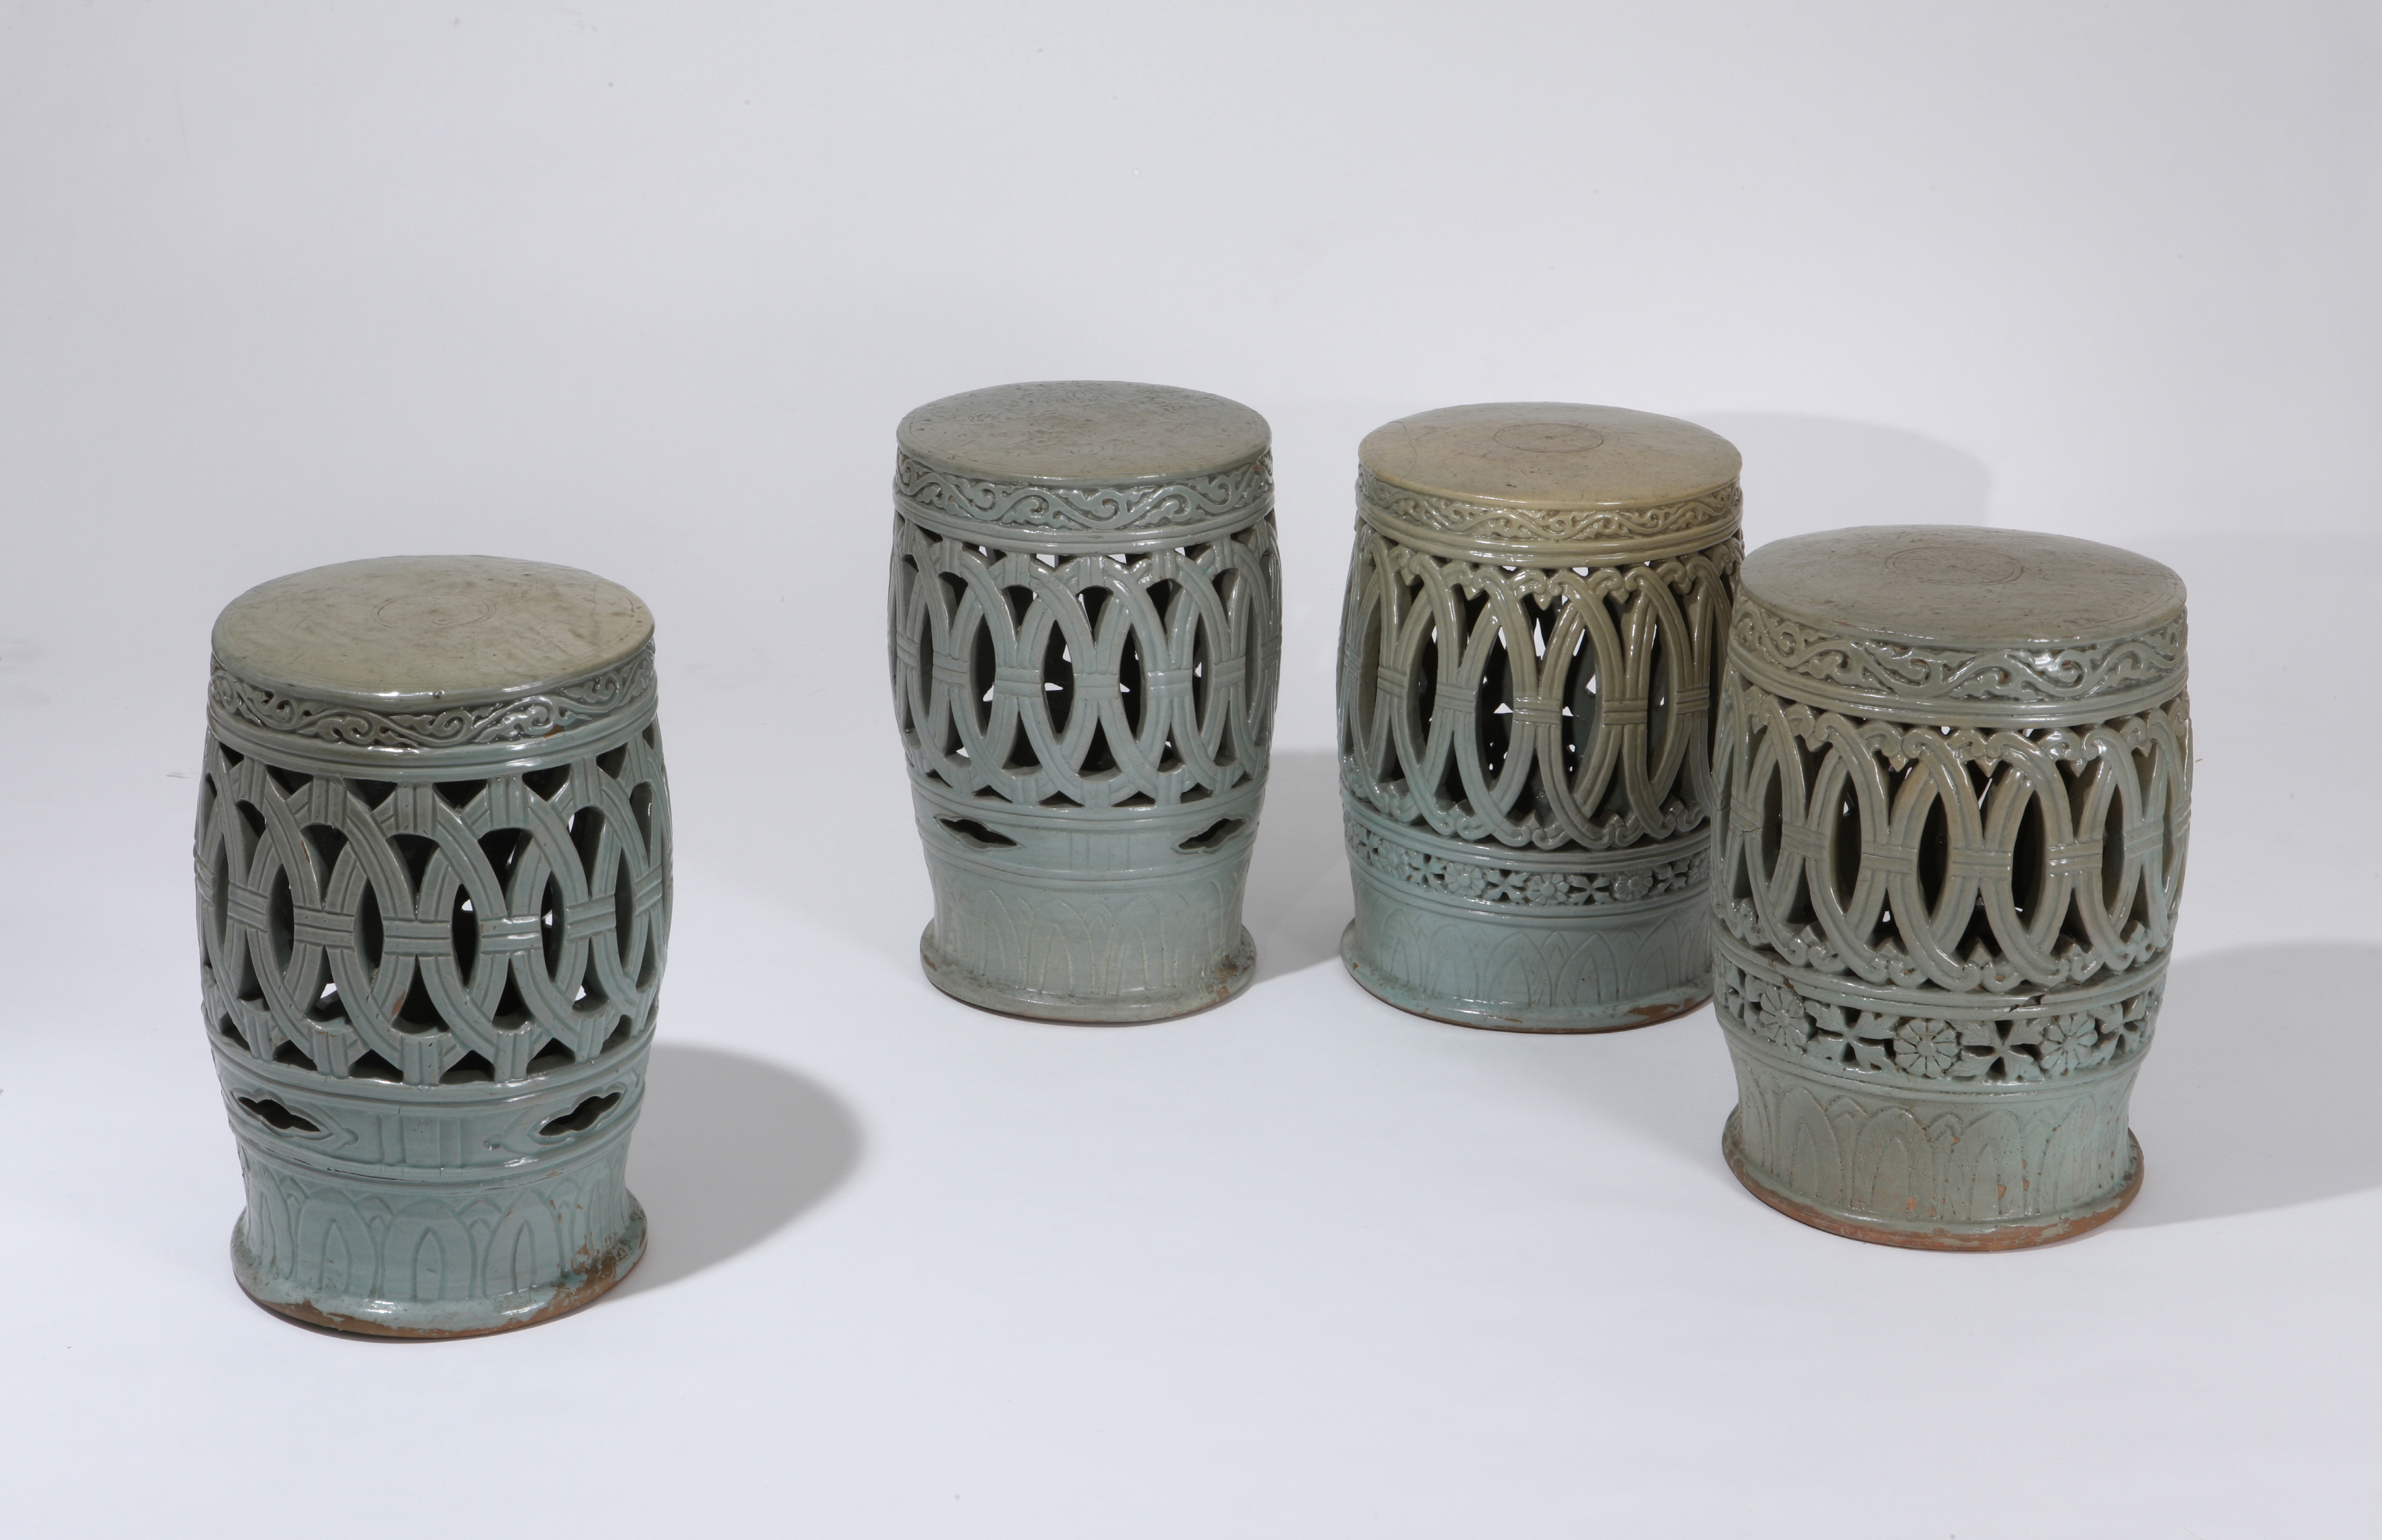 Stools with Linked-ring Design in Openwork